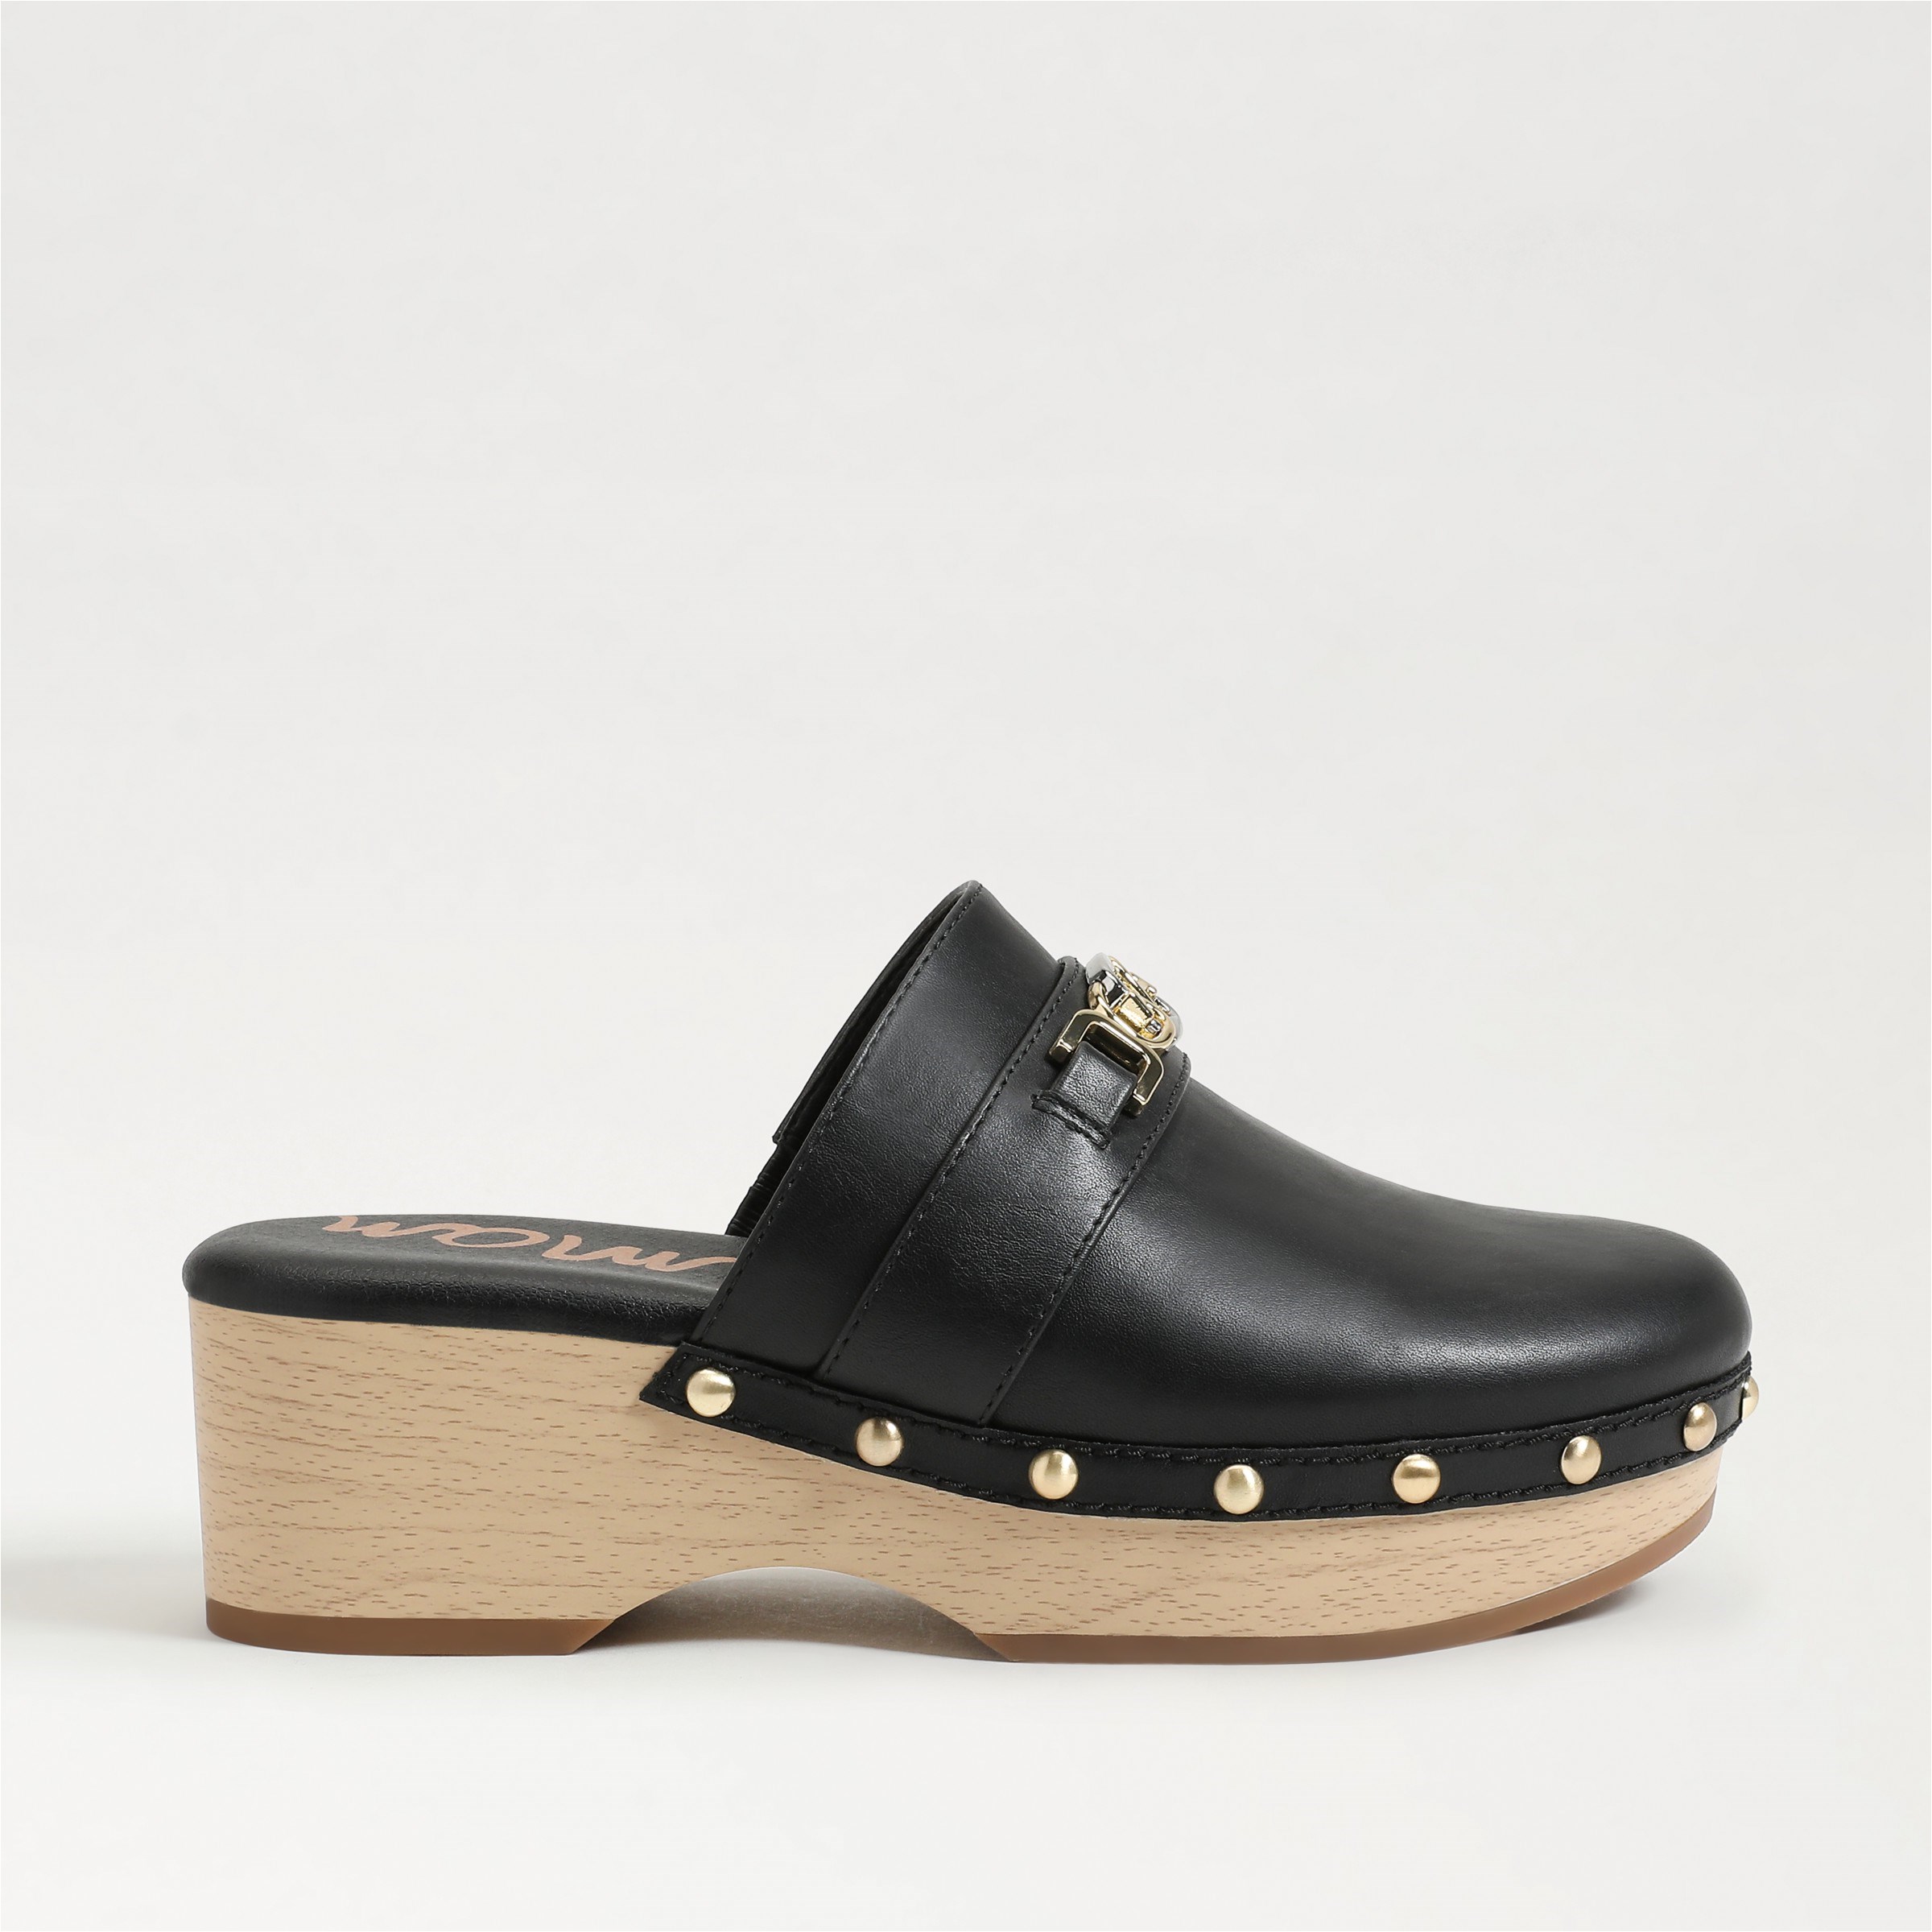 LV Cosy patent leather mules & clogs